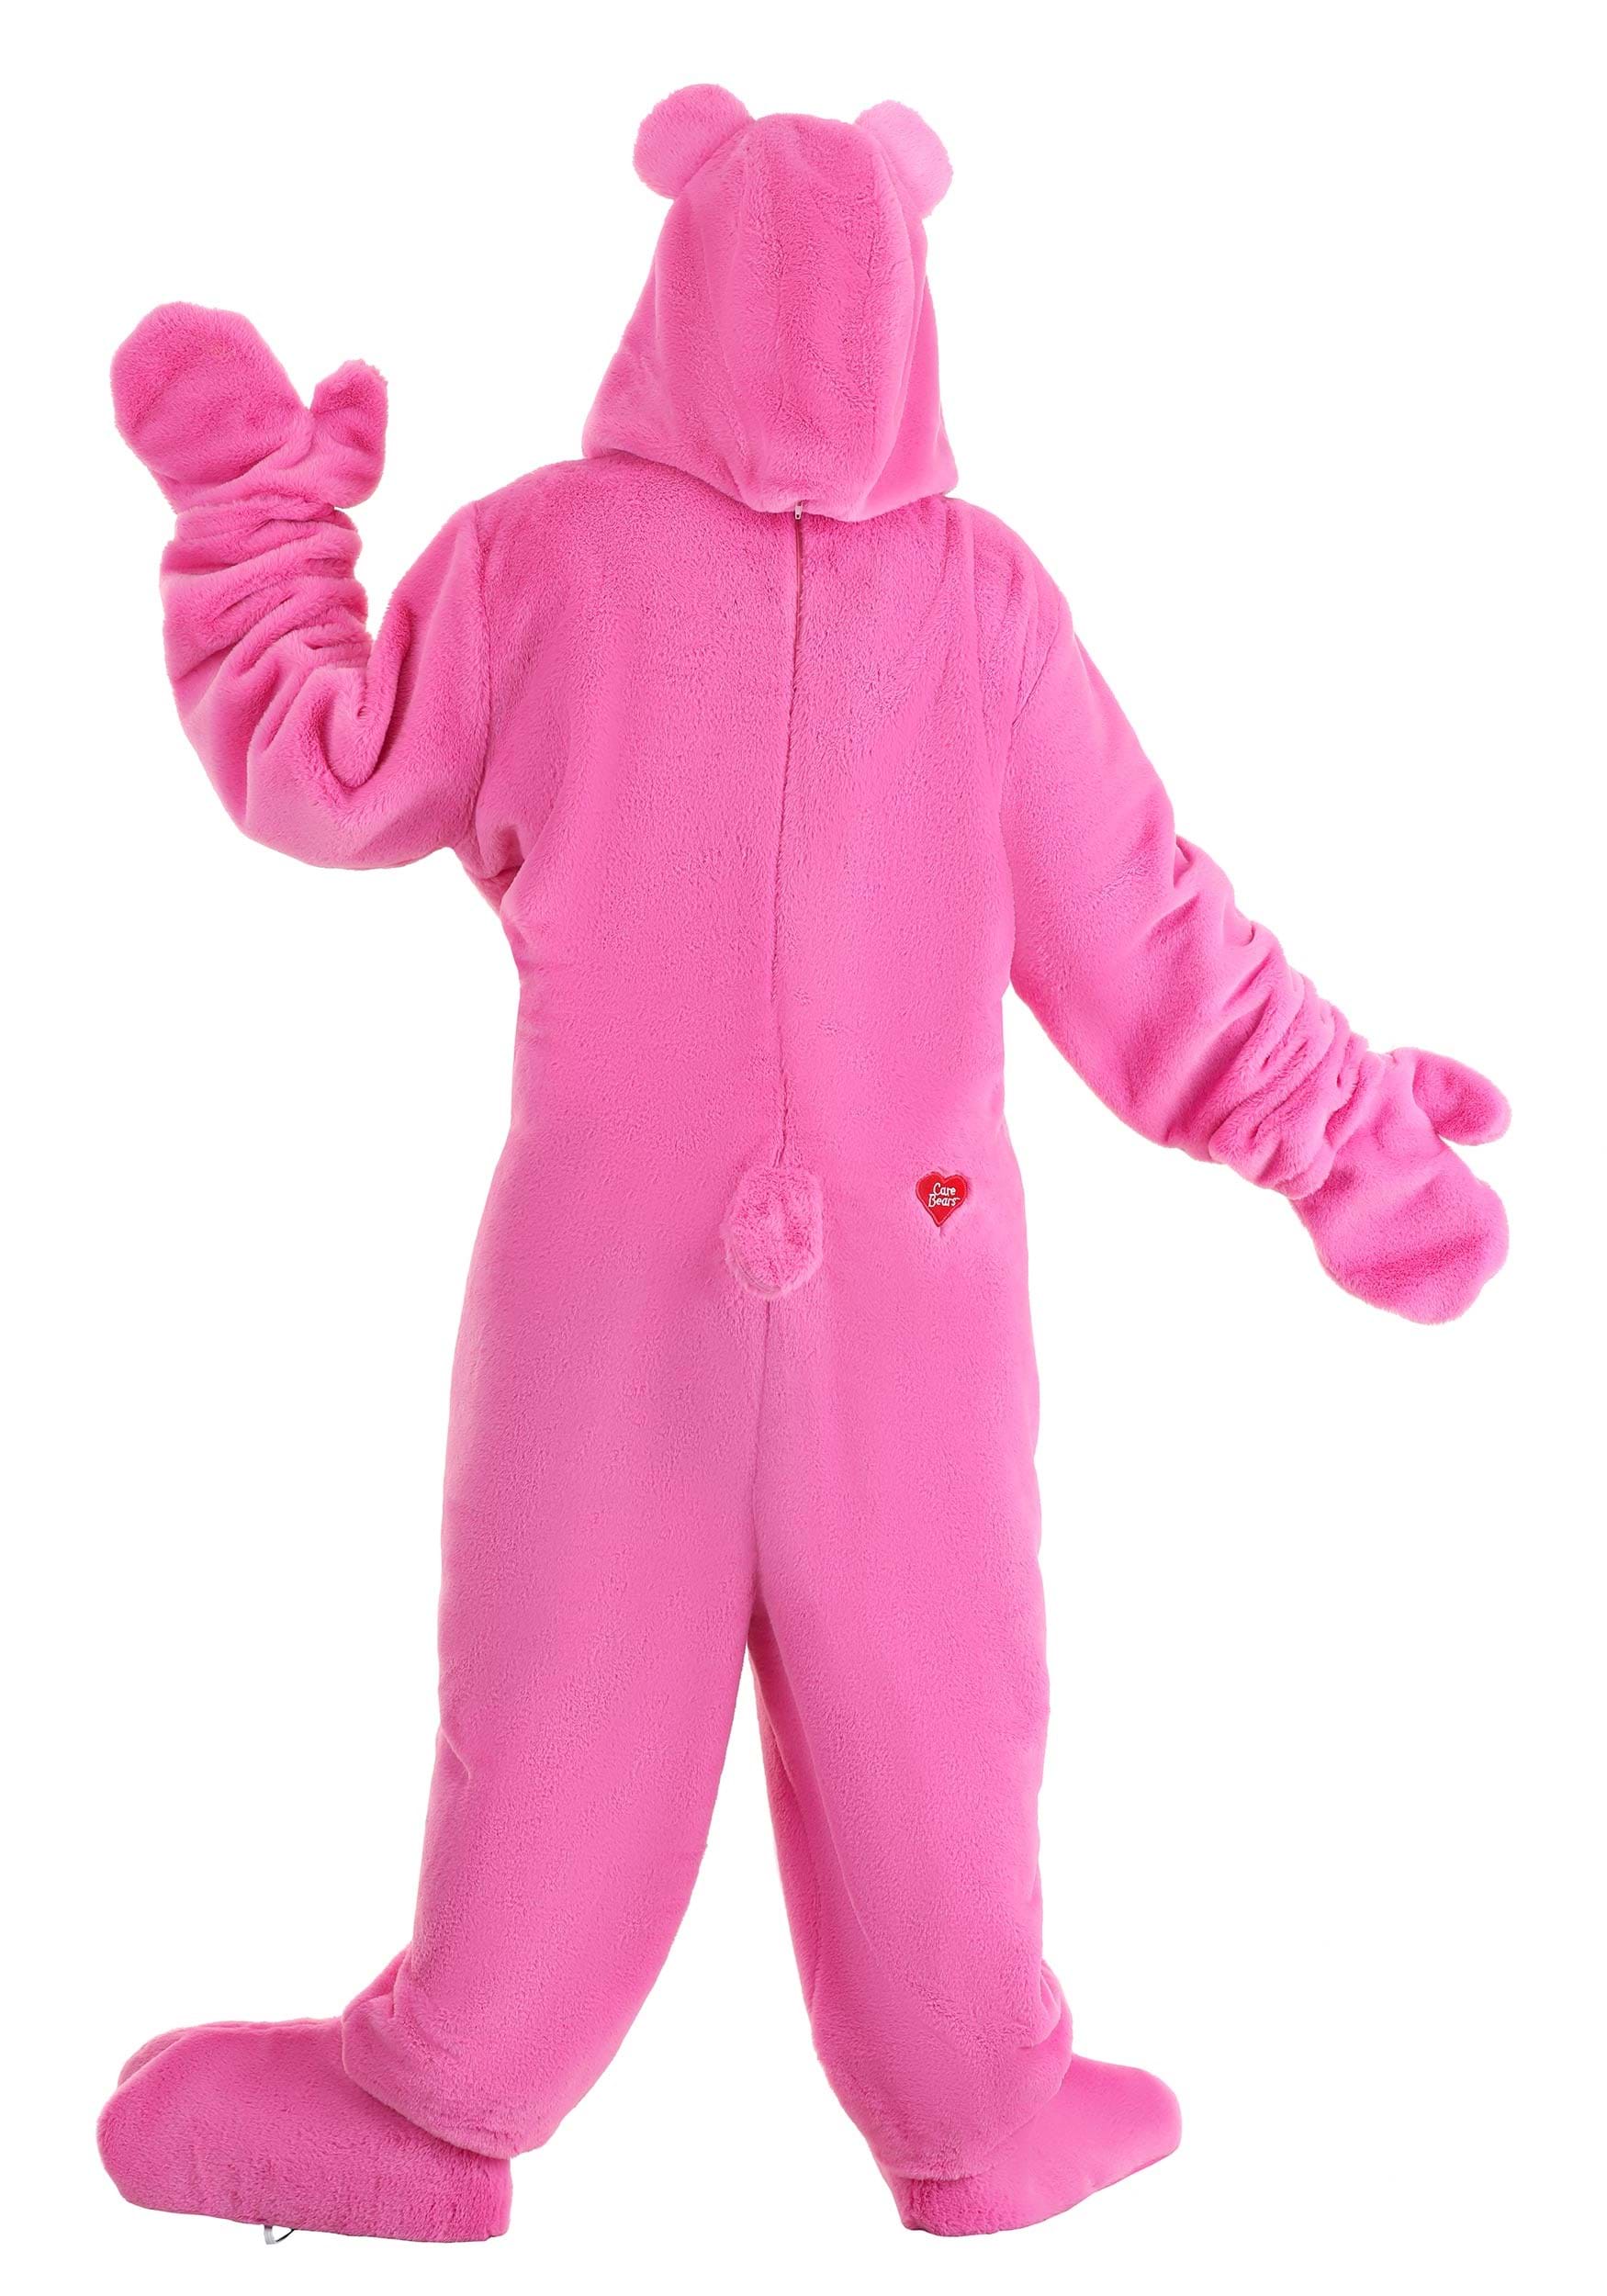 Elephant Costume Porn - Plus Size Adult Care Bears Deluxe Cheer Bear Costume